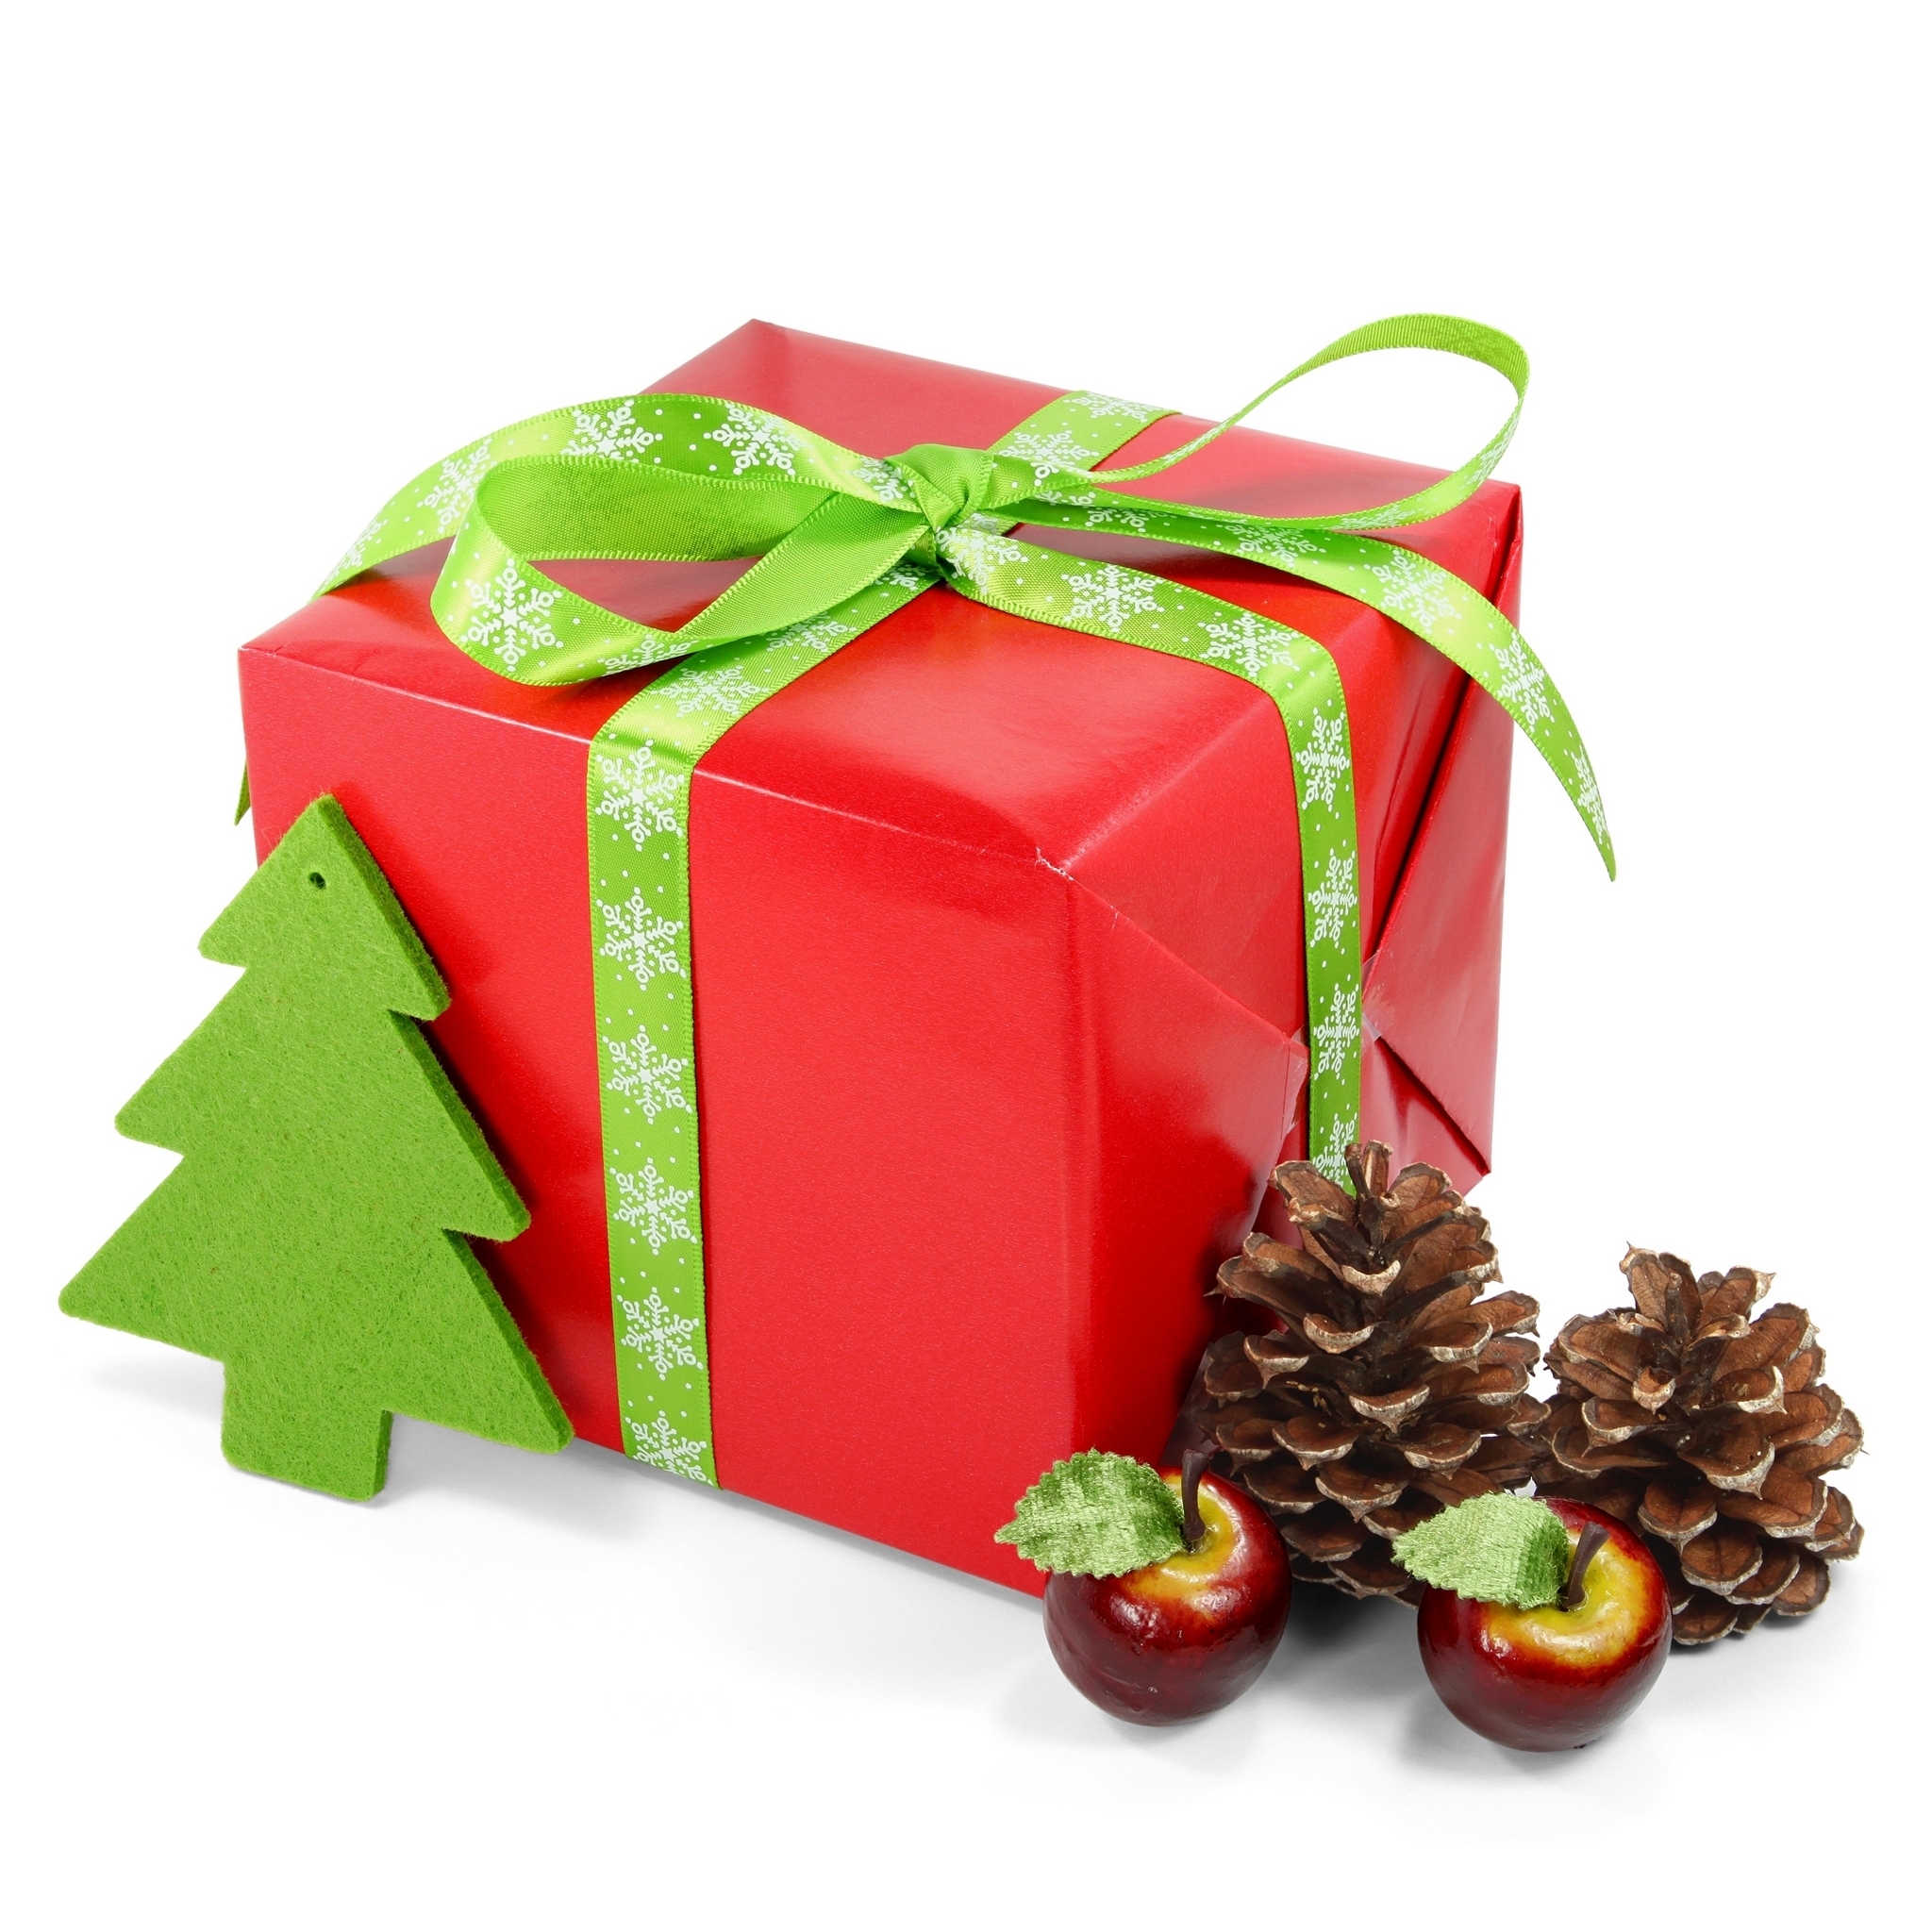 free clipart pictures of christmas presents - photo #32